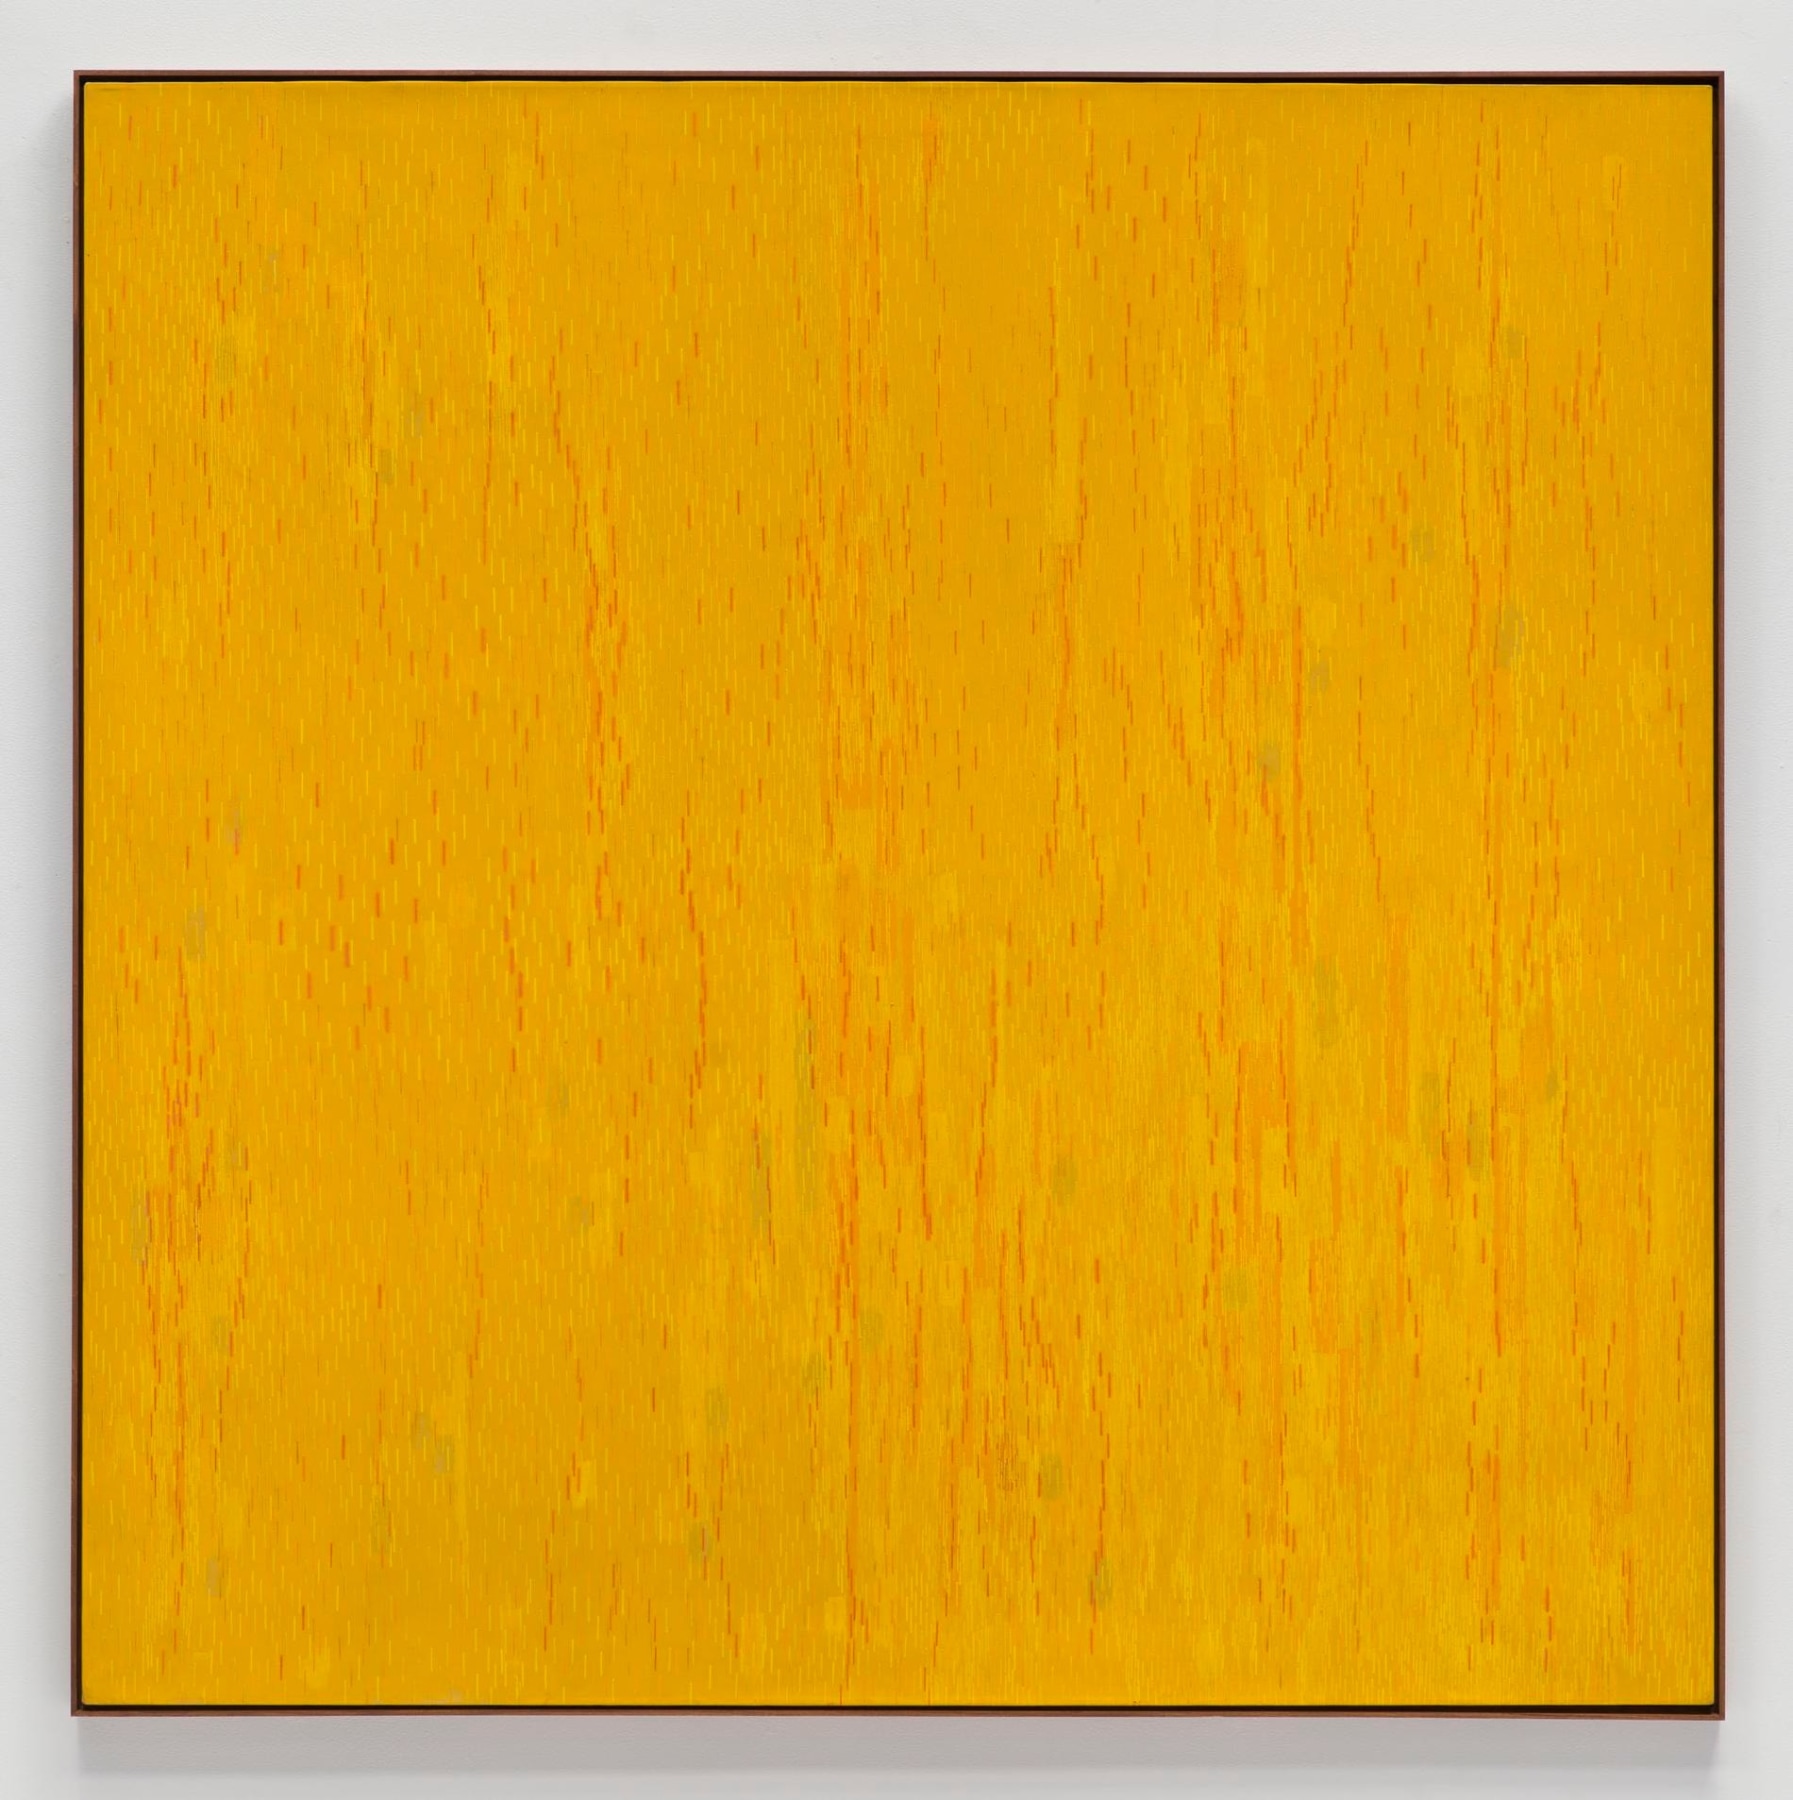 Image of LEE MULLICAN's Meditation on the Vertical, 1962